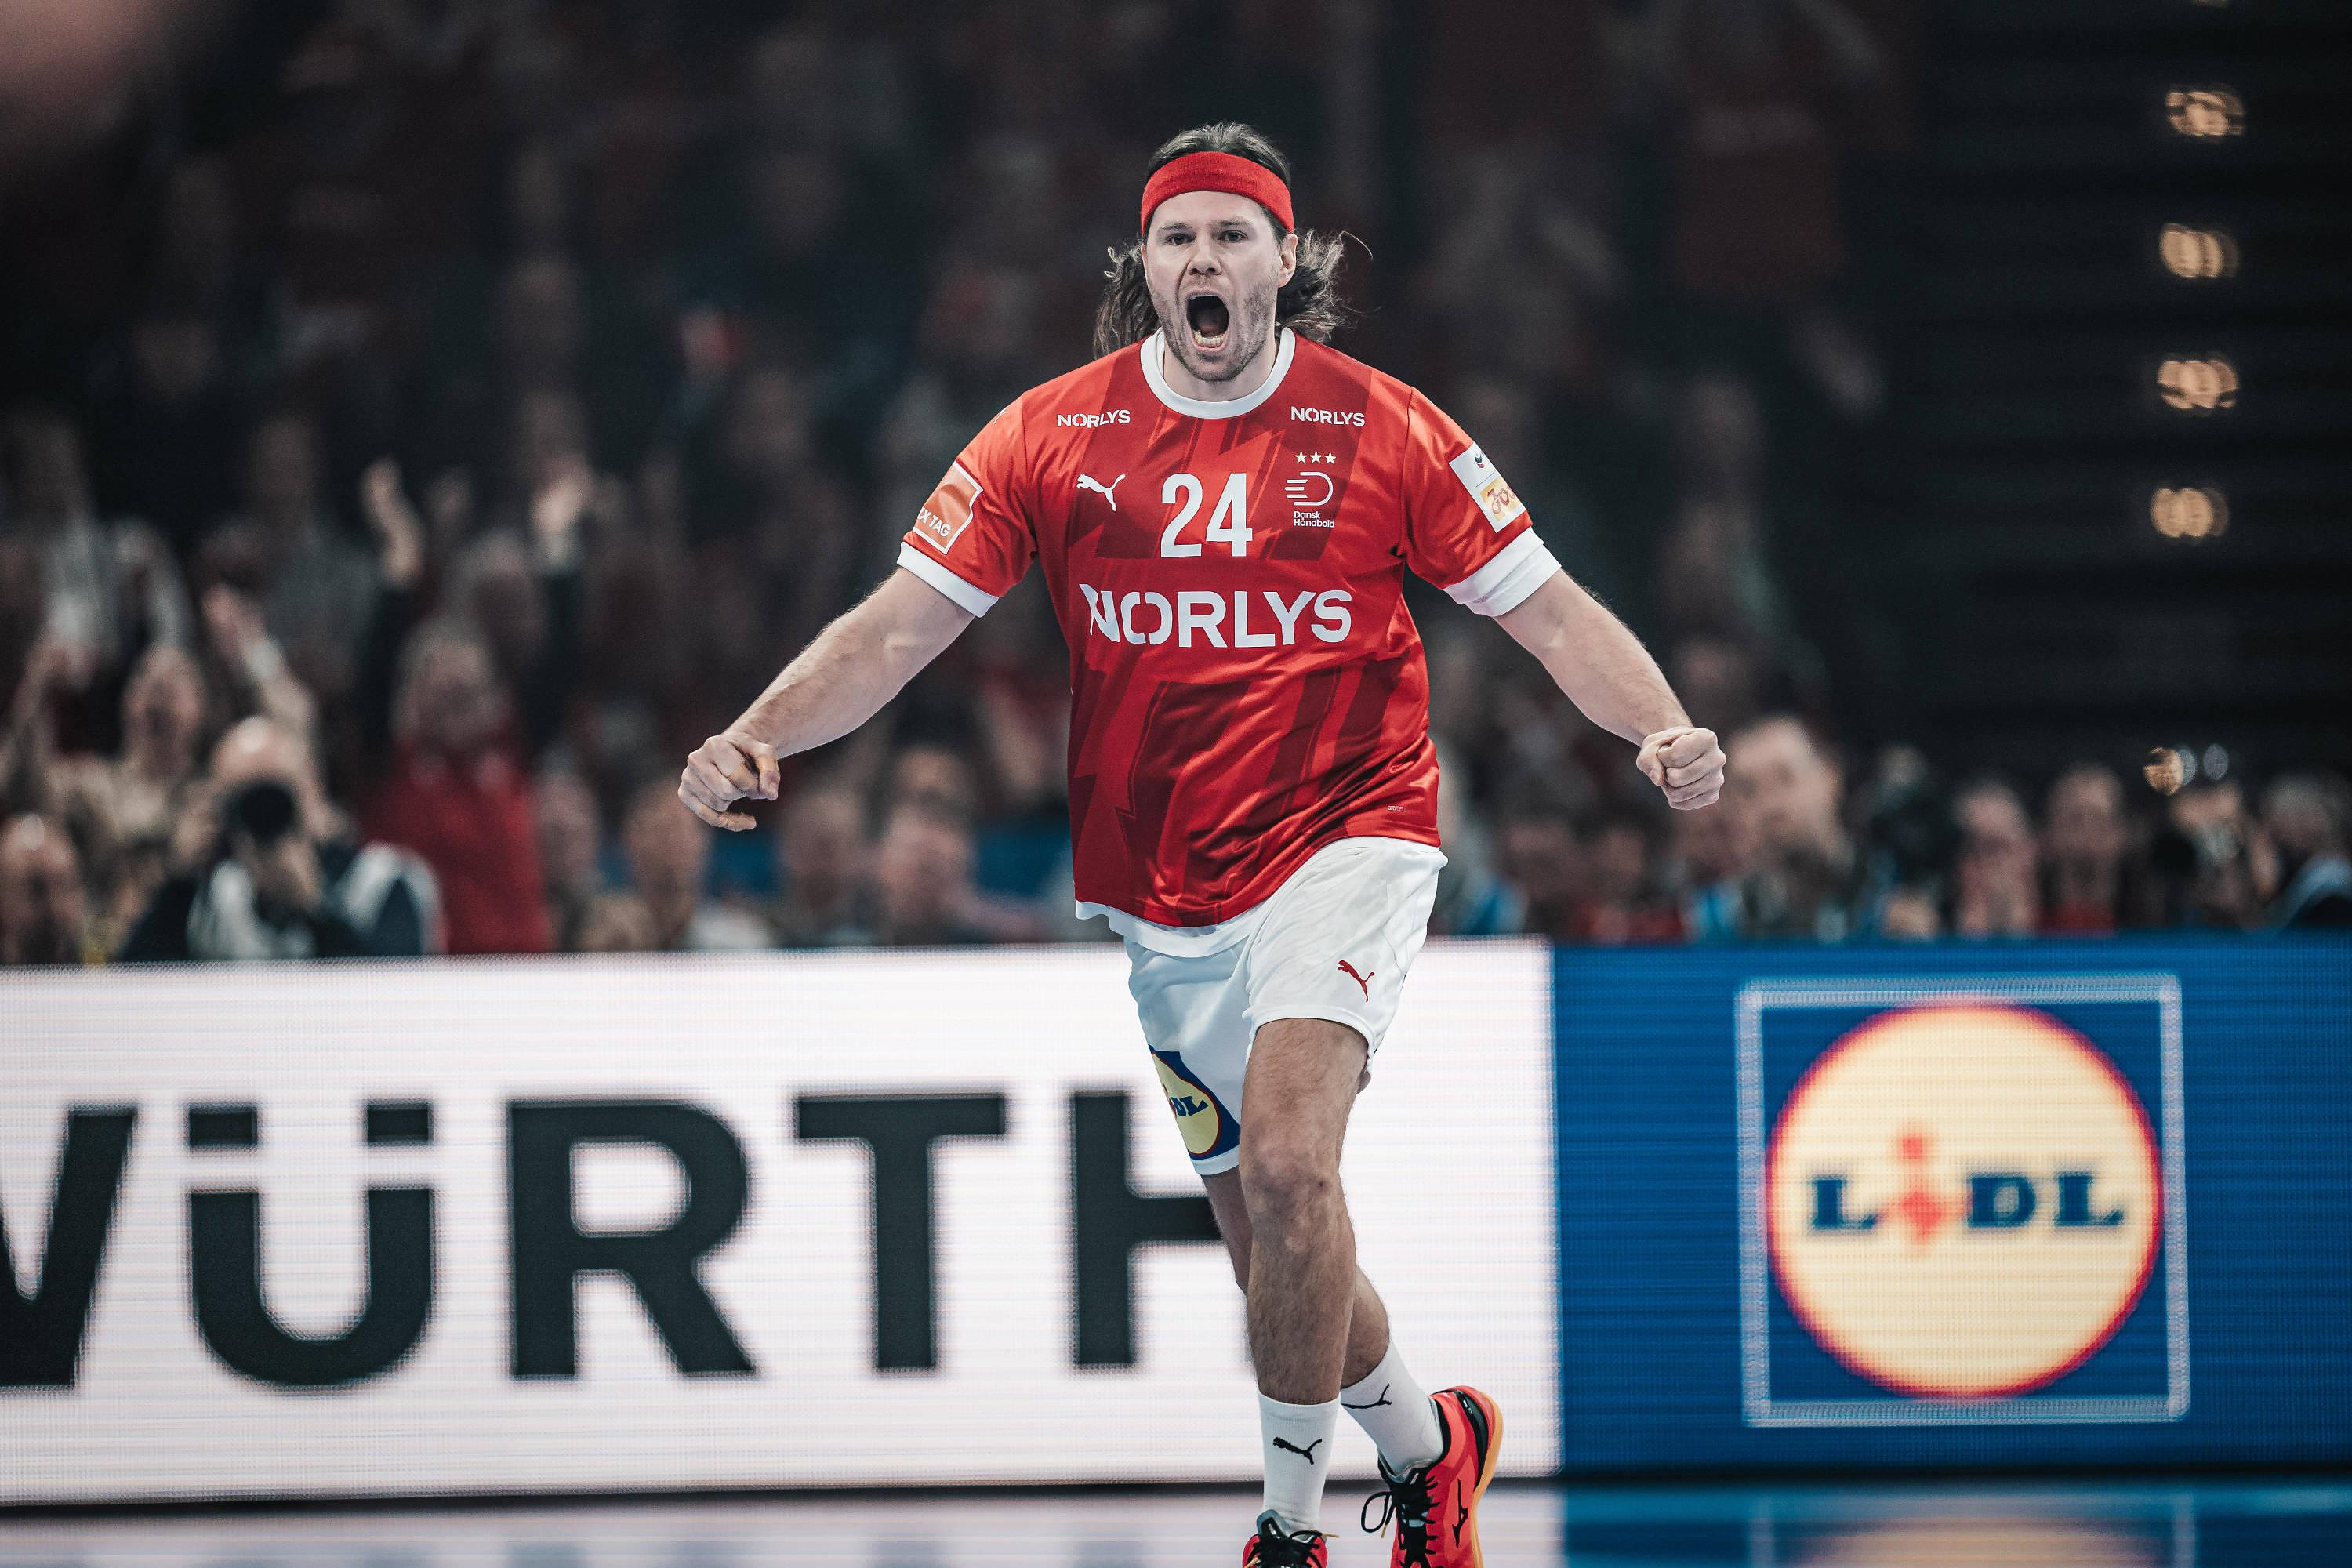 Euro handball: Denmark and Sweden qualified for the semi-finals